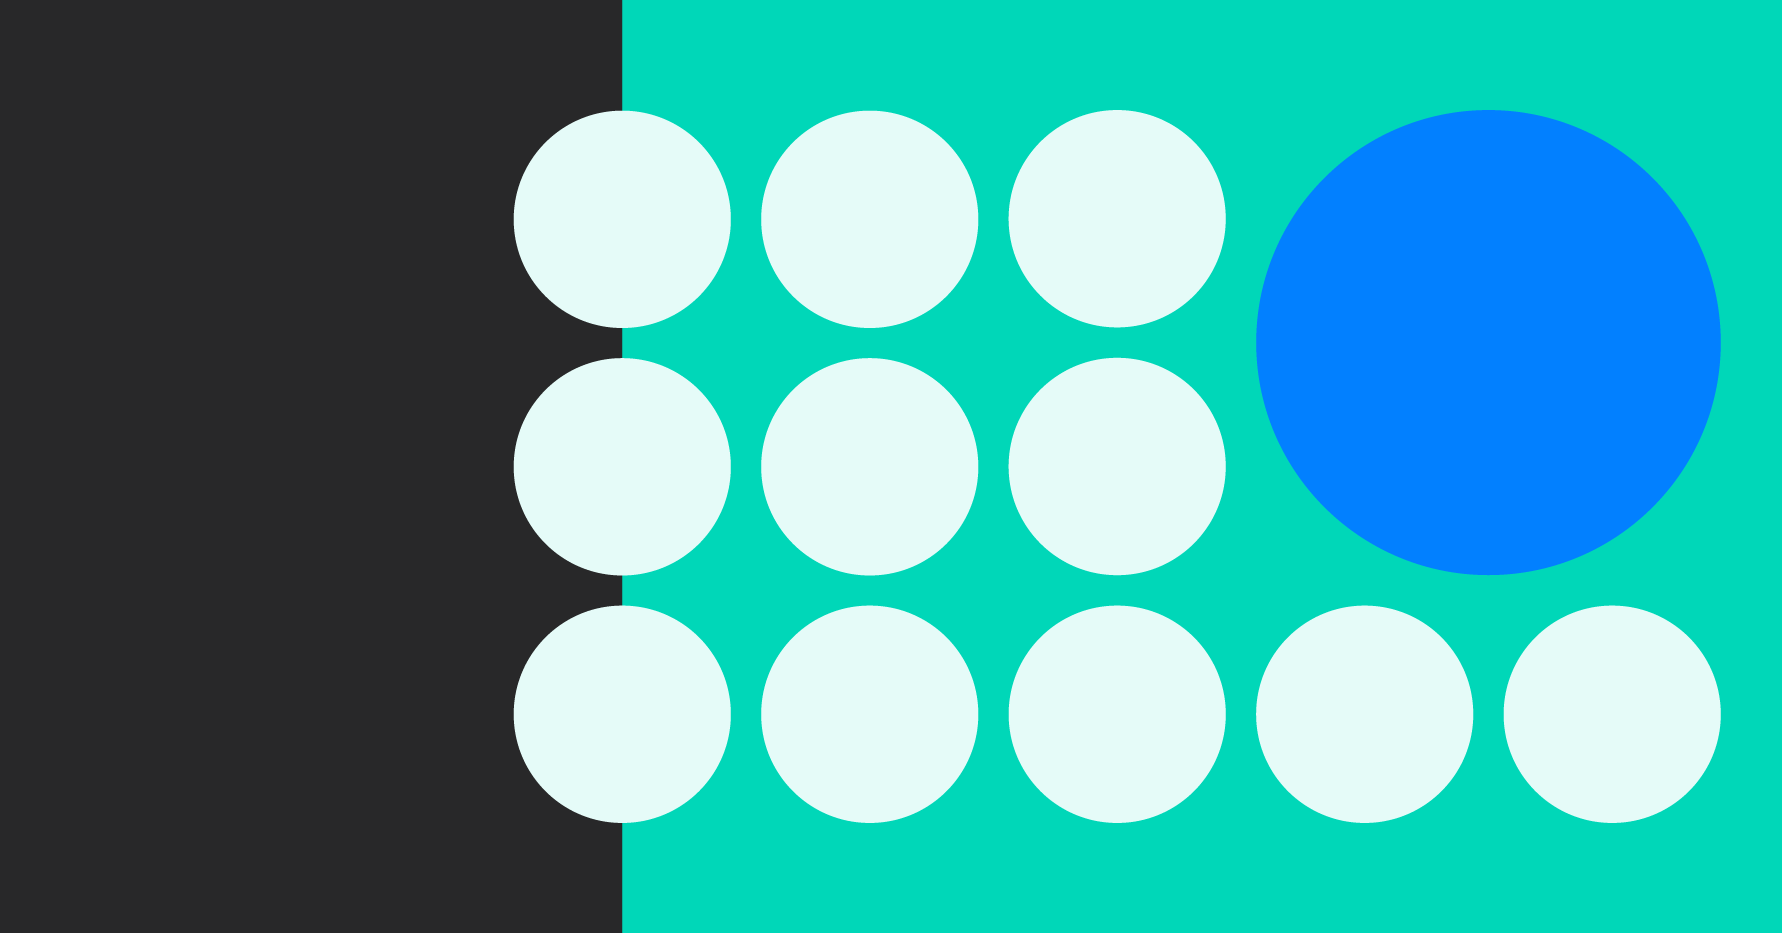 Stylistic illustration of a grid of circles and one large circle